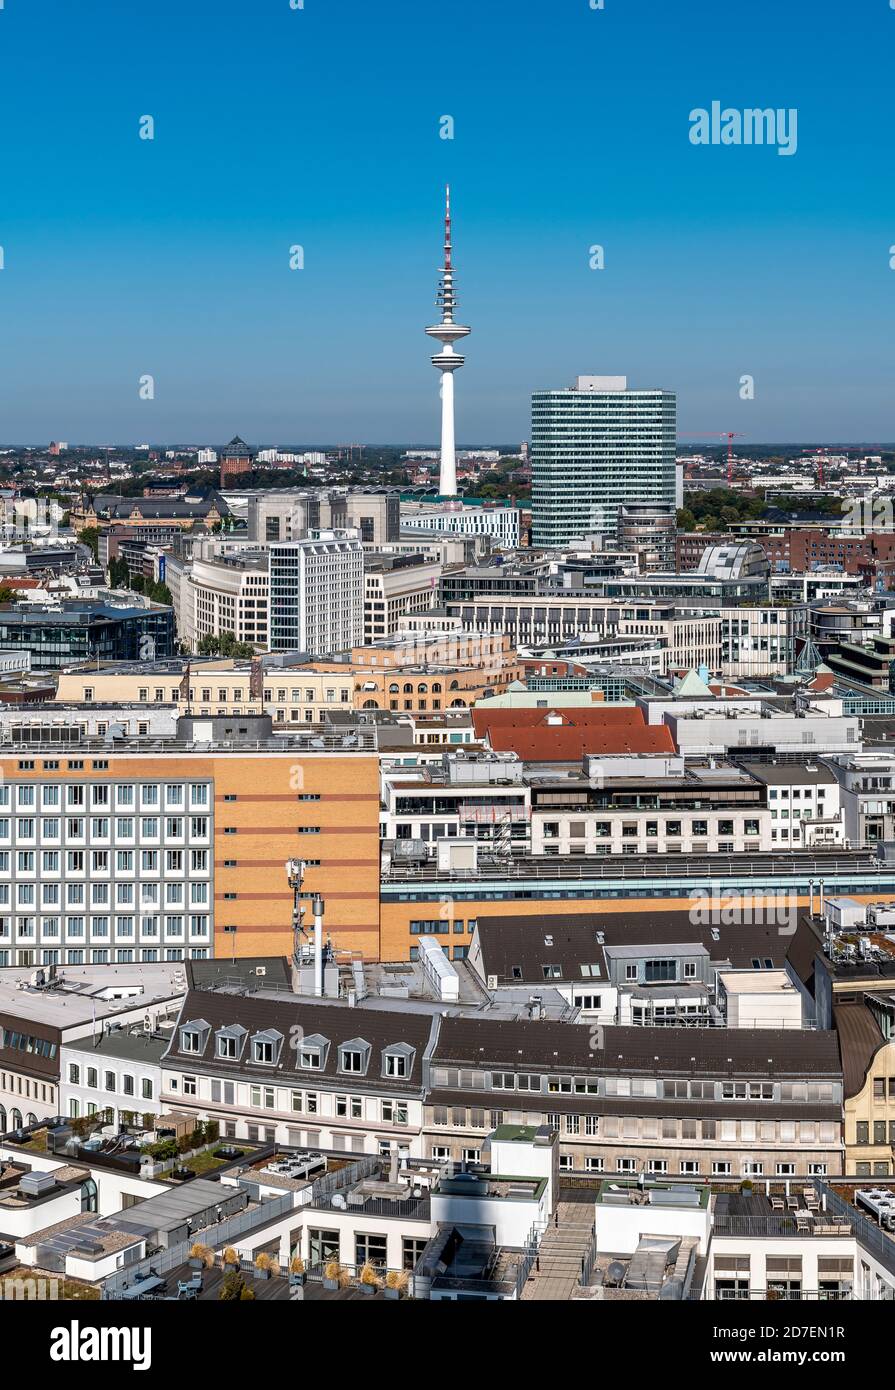 View north over the rooftops from St. Nikolai Memorial in Hamburg, to TV Tower - Fernsehturm - Heinrich Hertz Tower - in the distance. Stock Photo